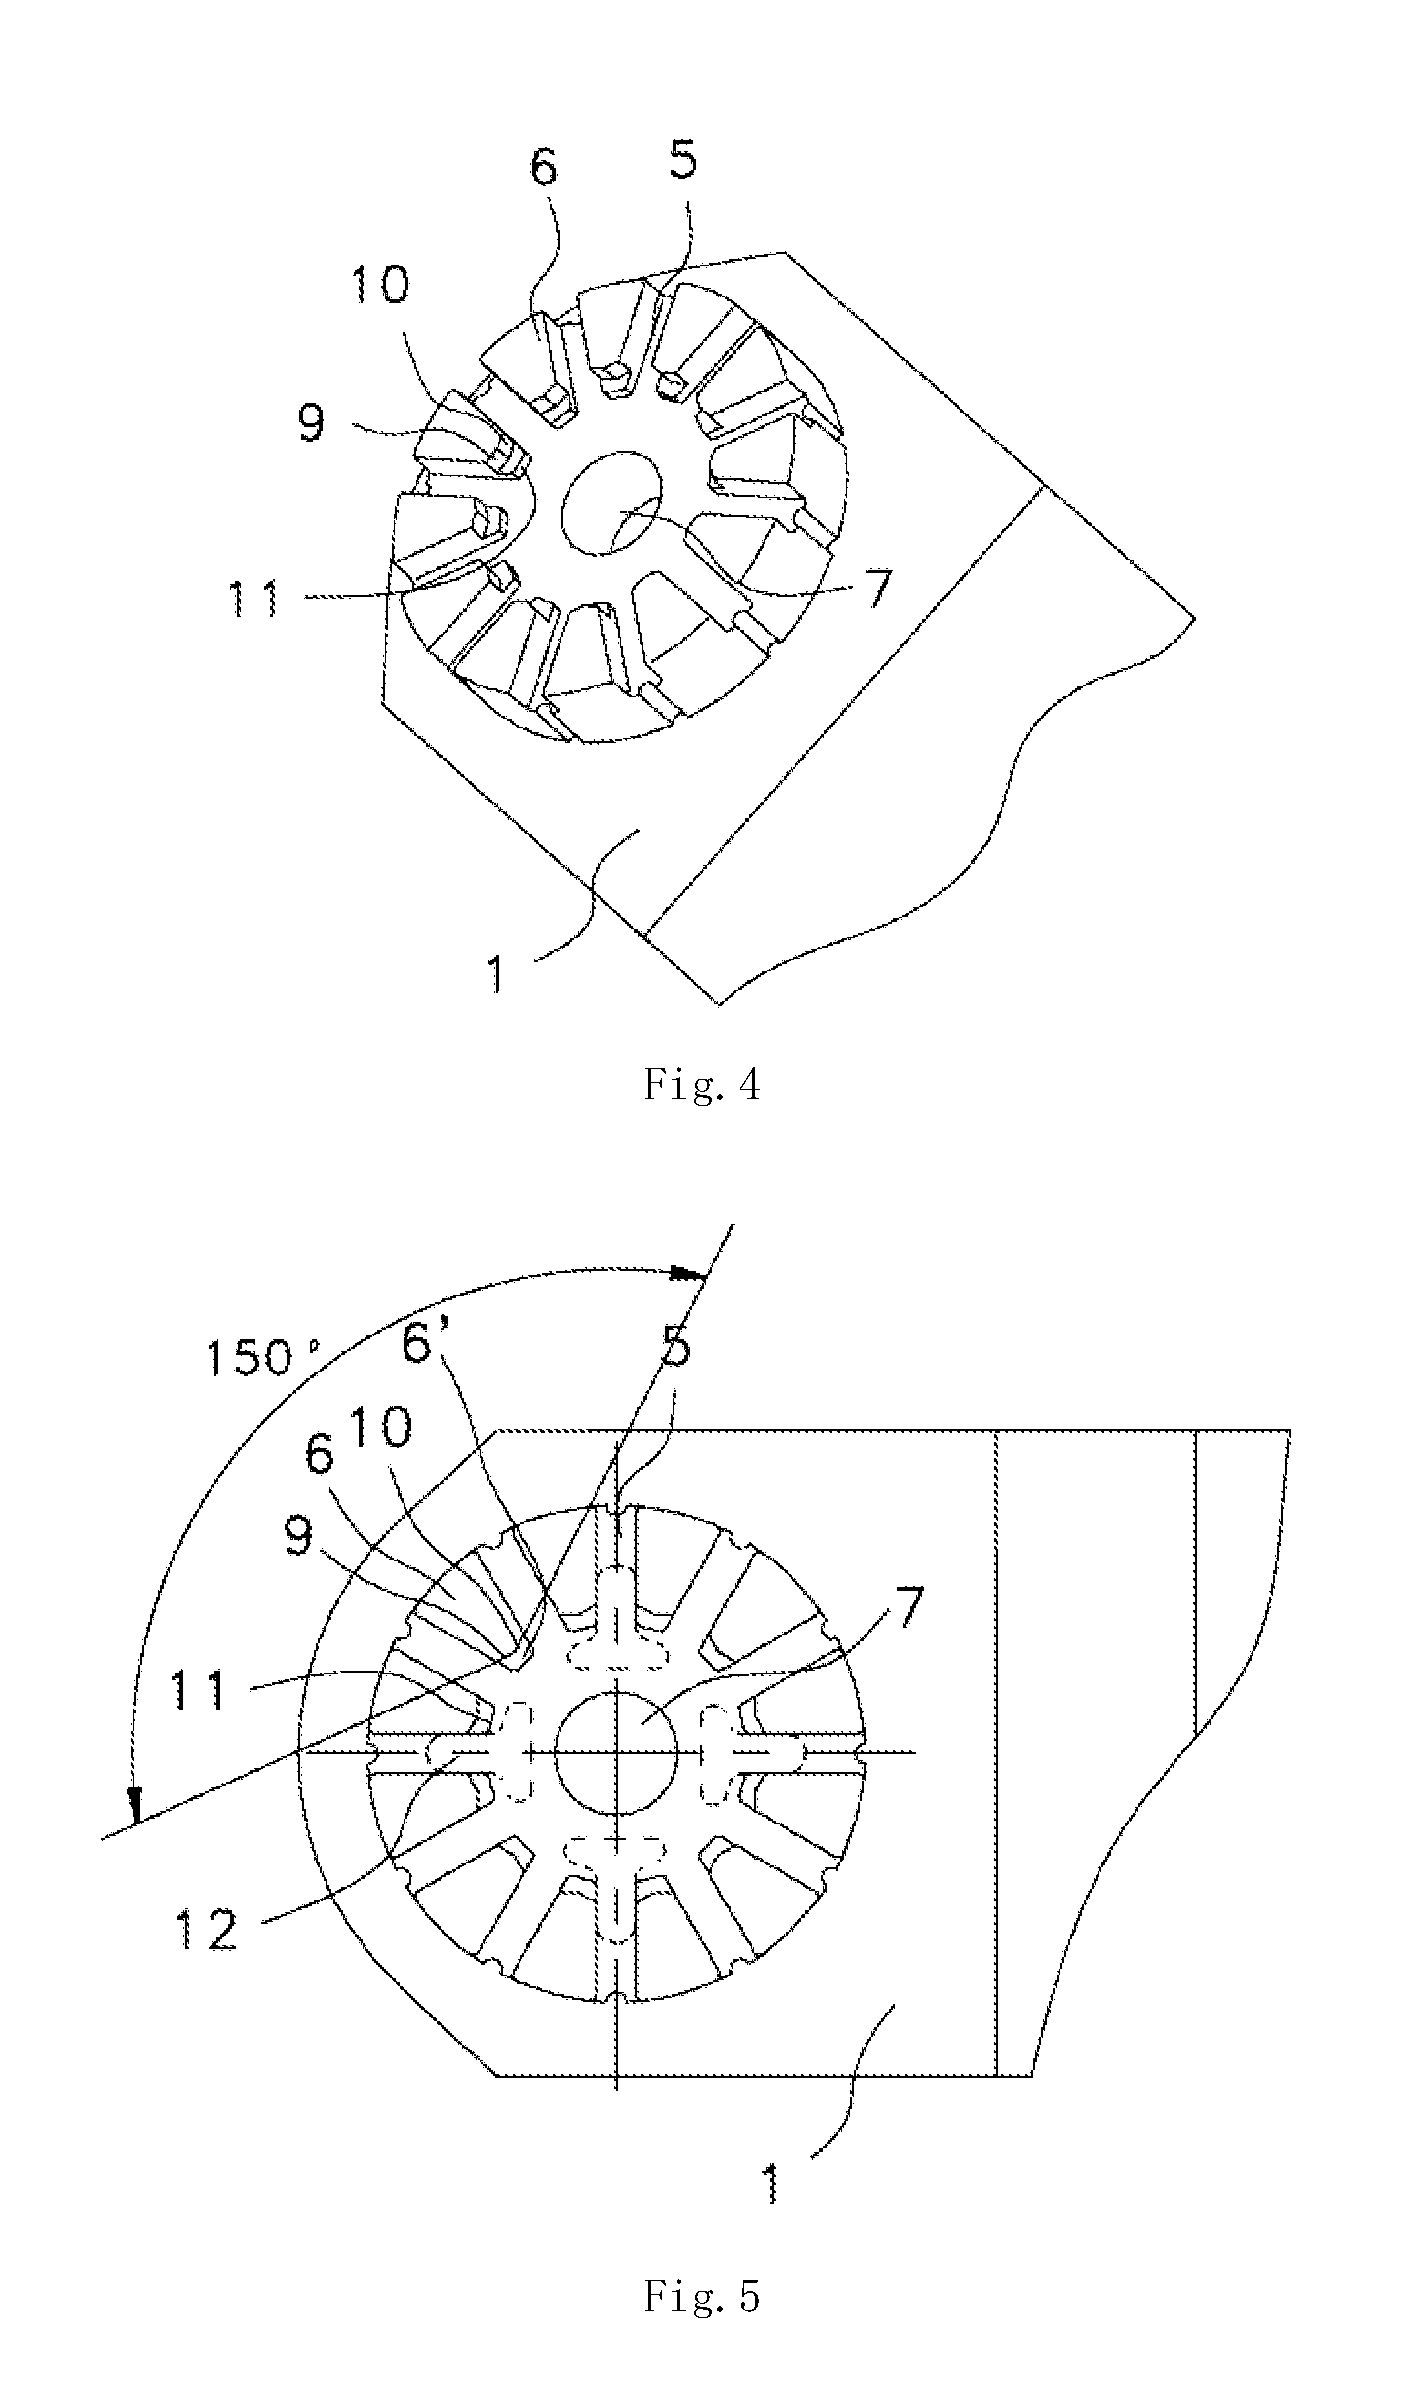 Working component for mating with multiple shaft ends